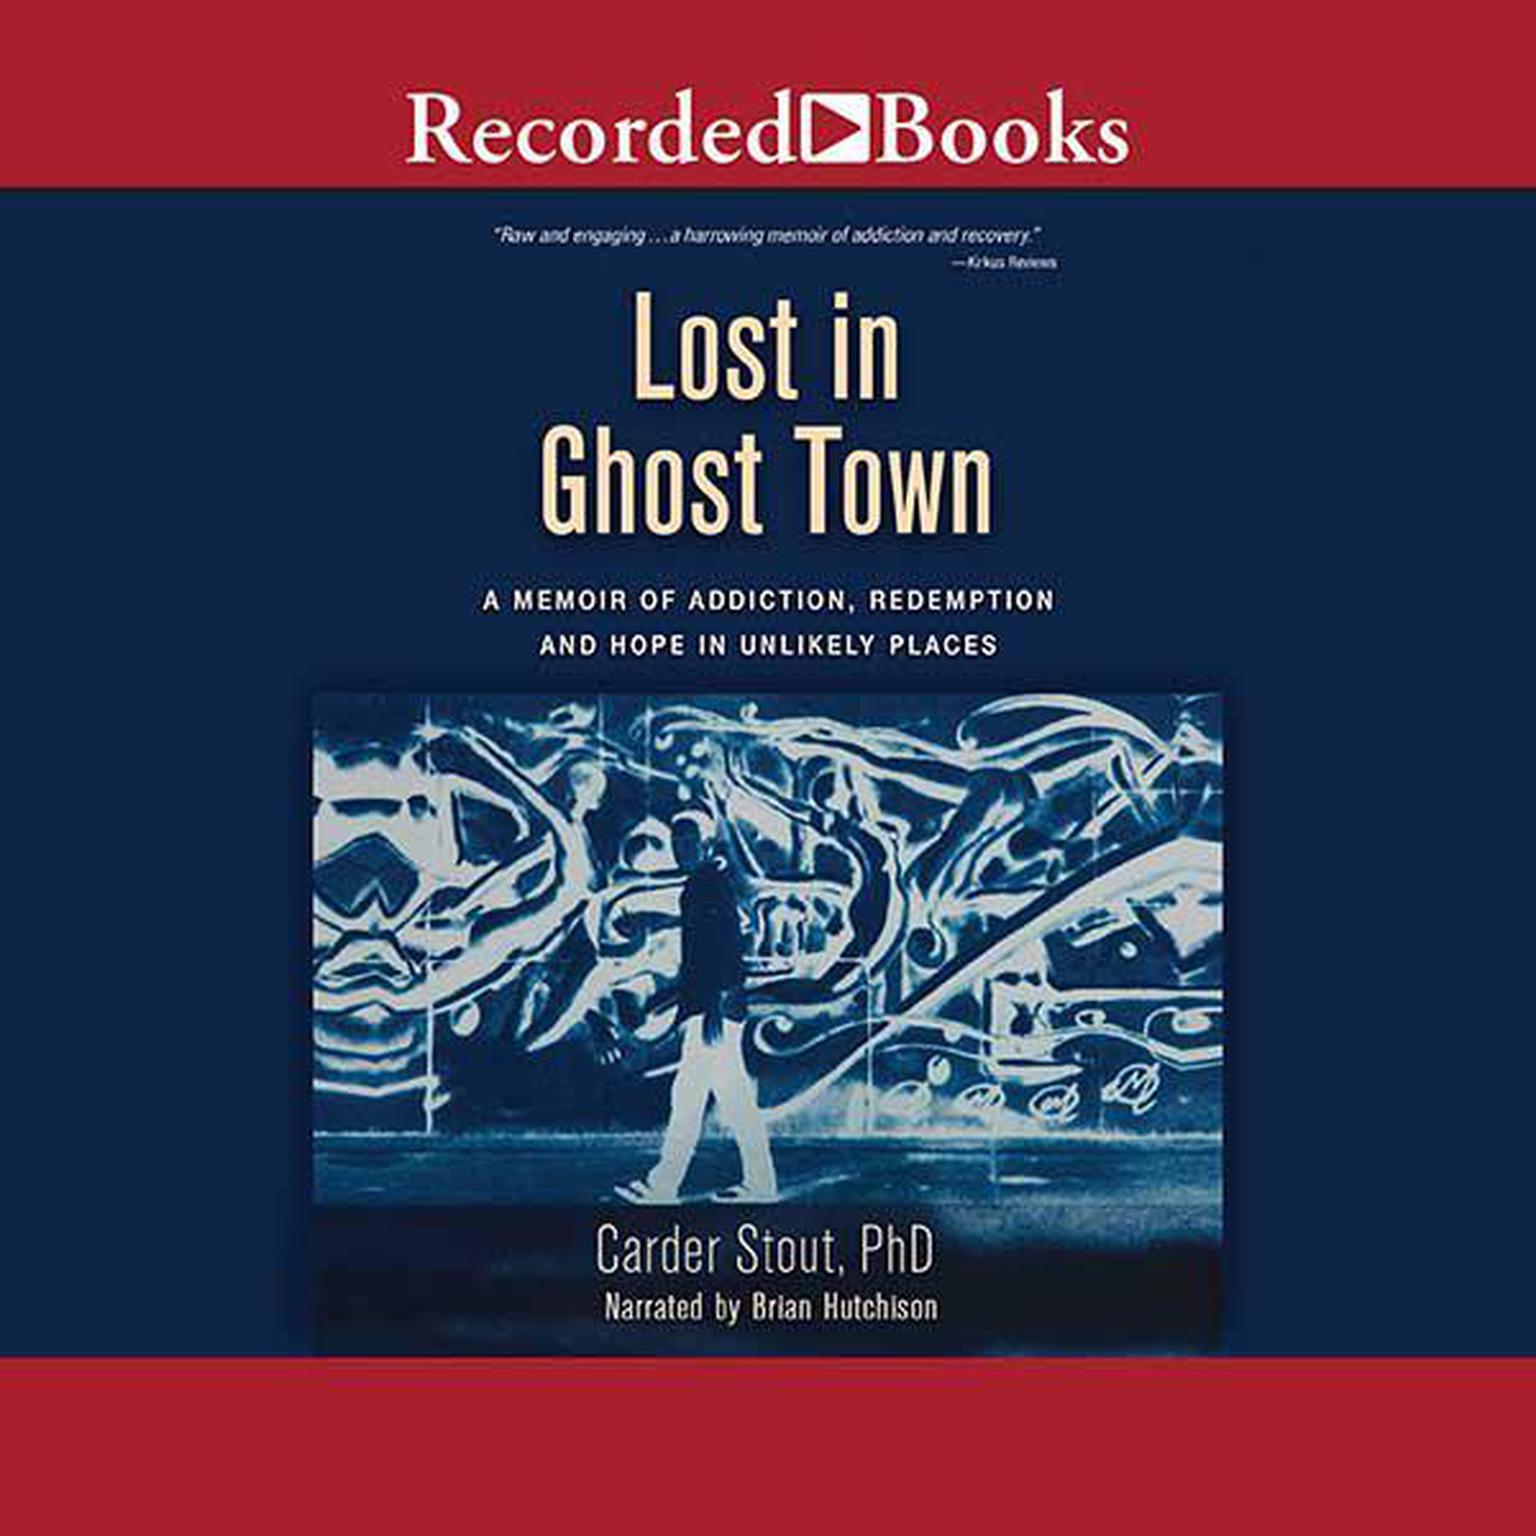 Lost in Ghost Town: A Memoir of Addiction, Redemption, and Hope in Unlikely Places Audiobook, by Carder Stout